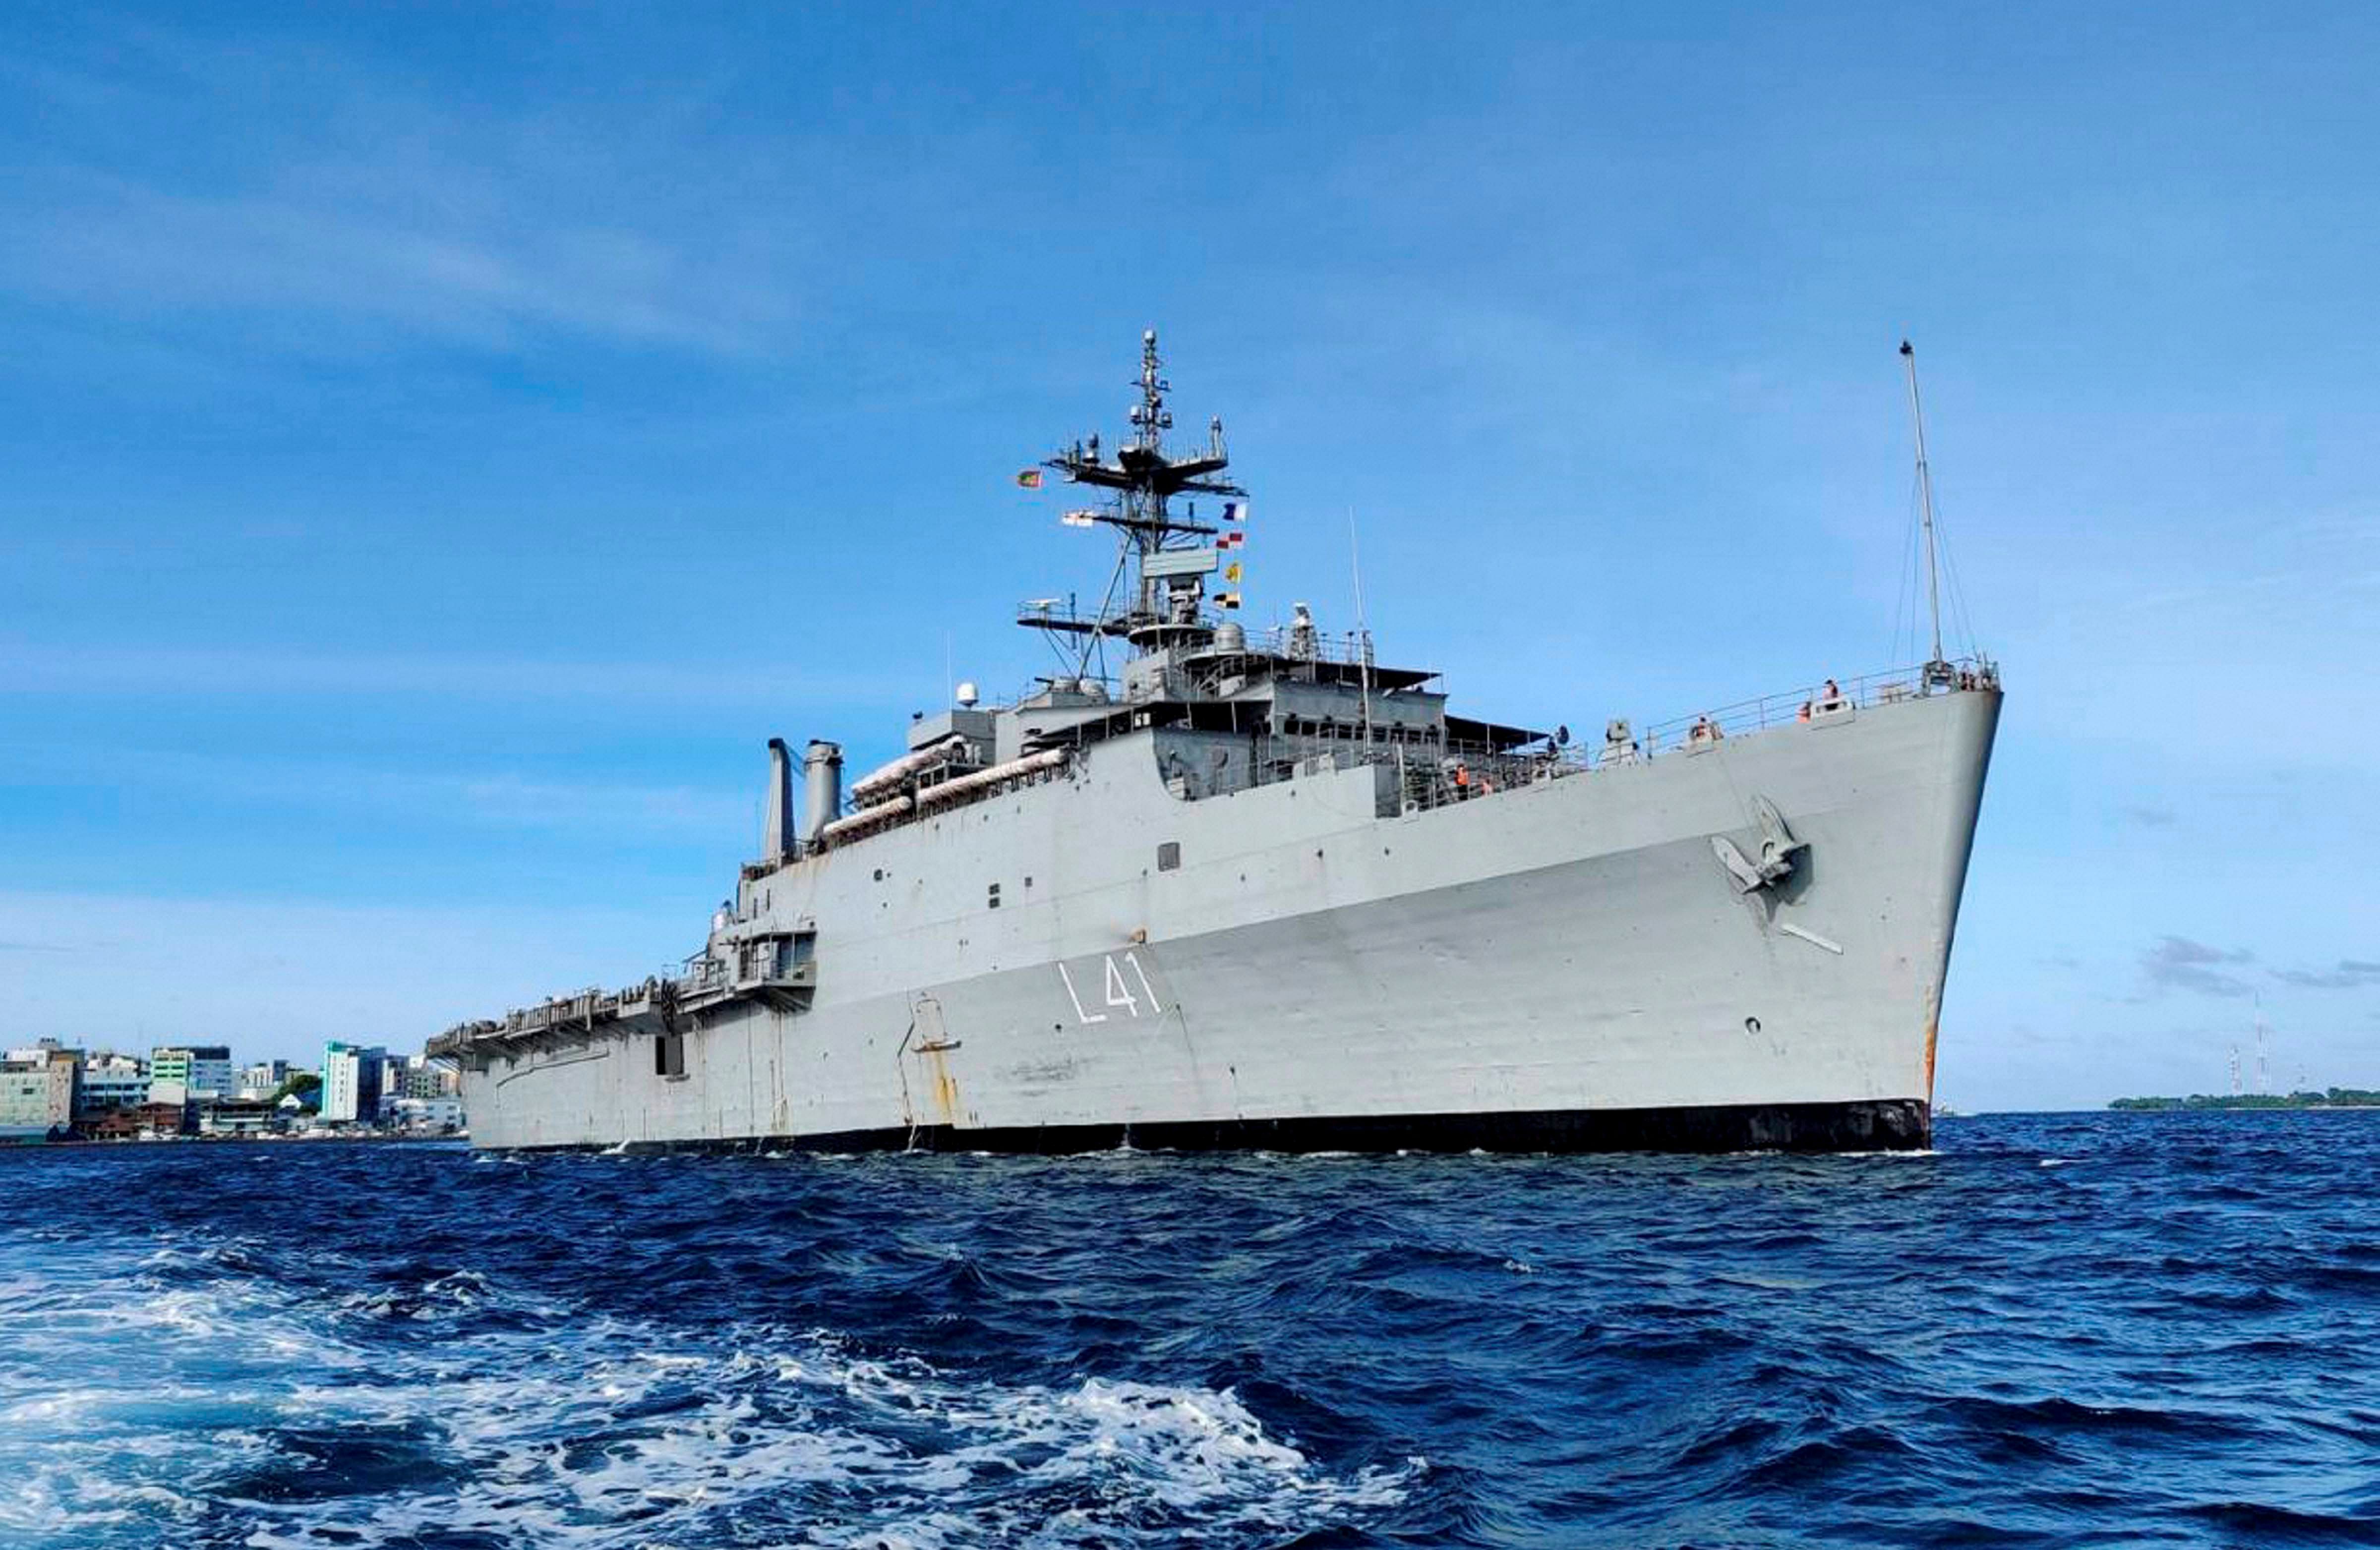 After disembarkation at Tuticorin, the evacuated personnel will be entrusted to the care of the state authorities, the Navy said. (Credit: PTI Photo)